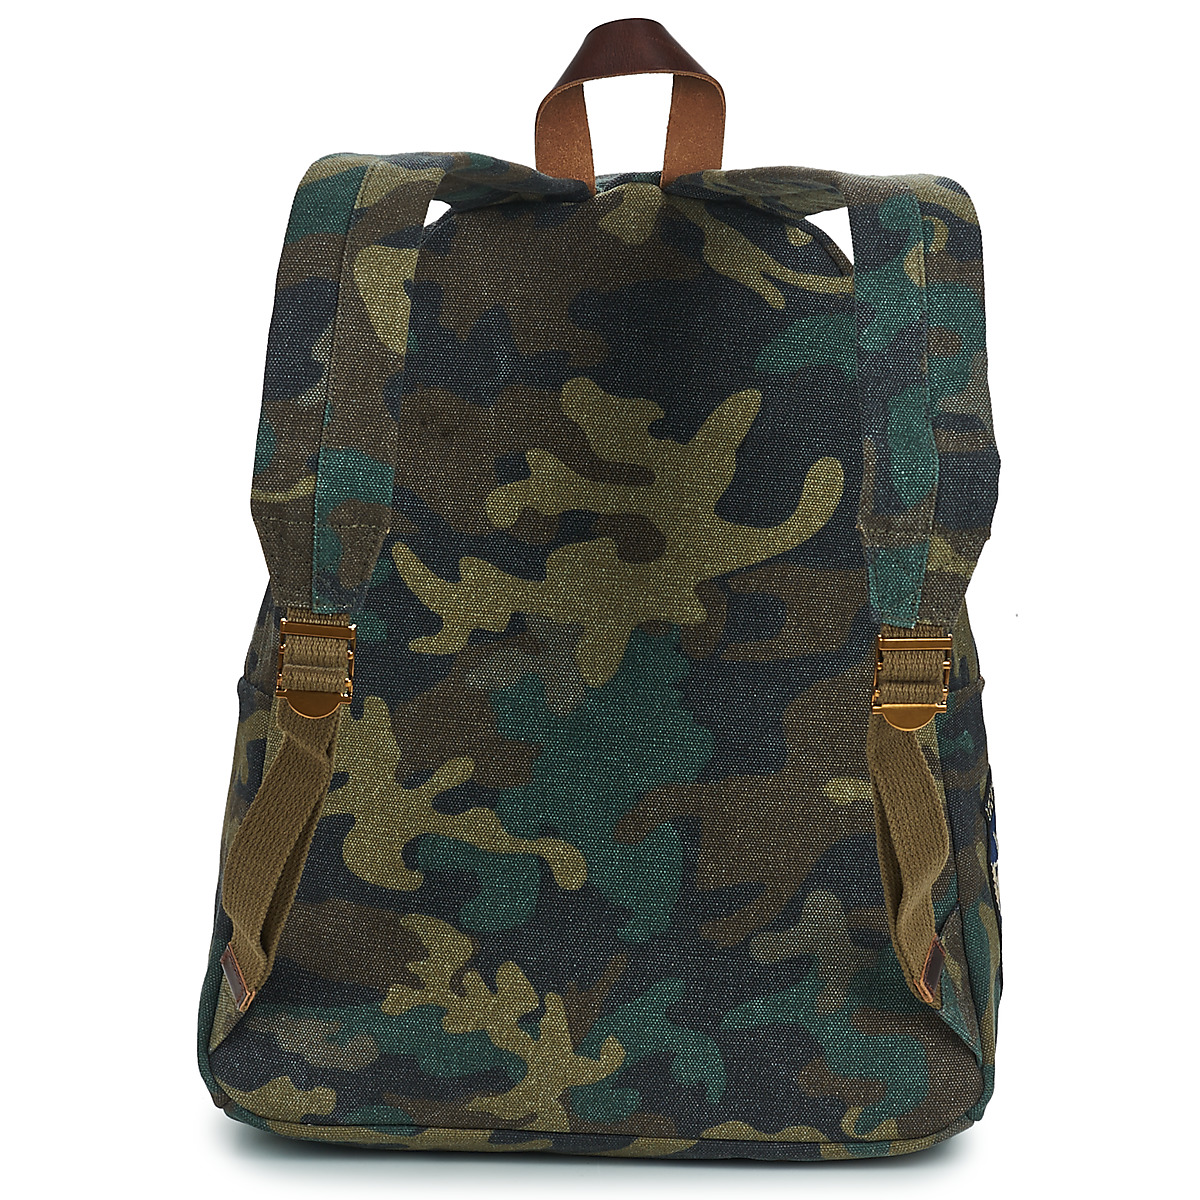 Polo Ralph Lauren Multicolore / Camouflage BACKPACK LARGE F1tAyNgj